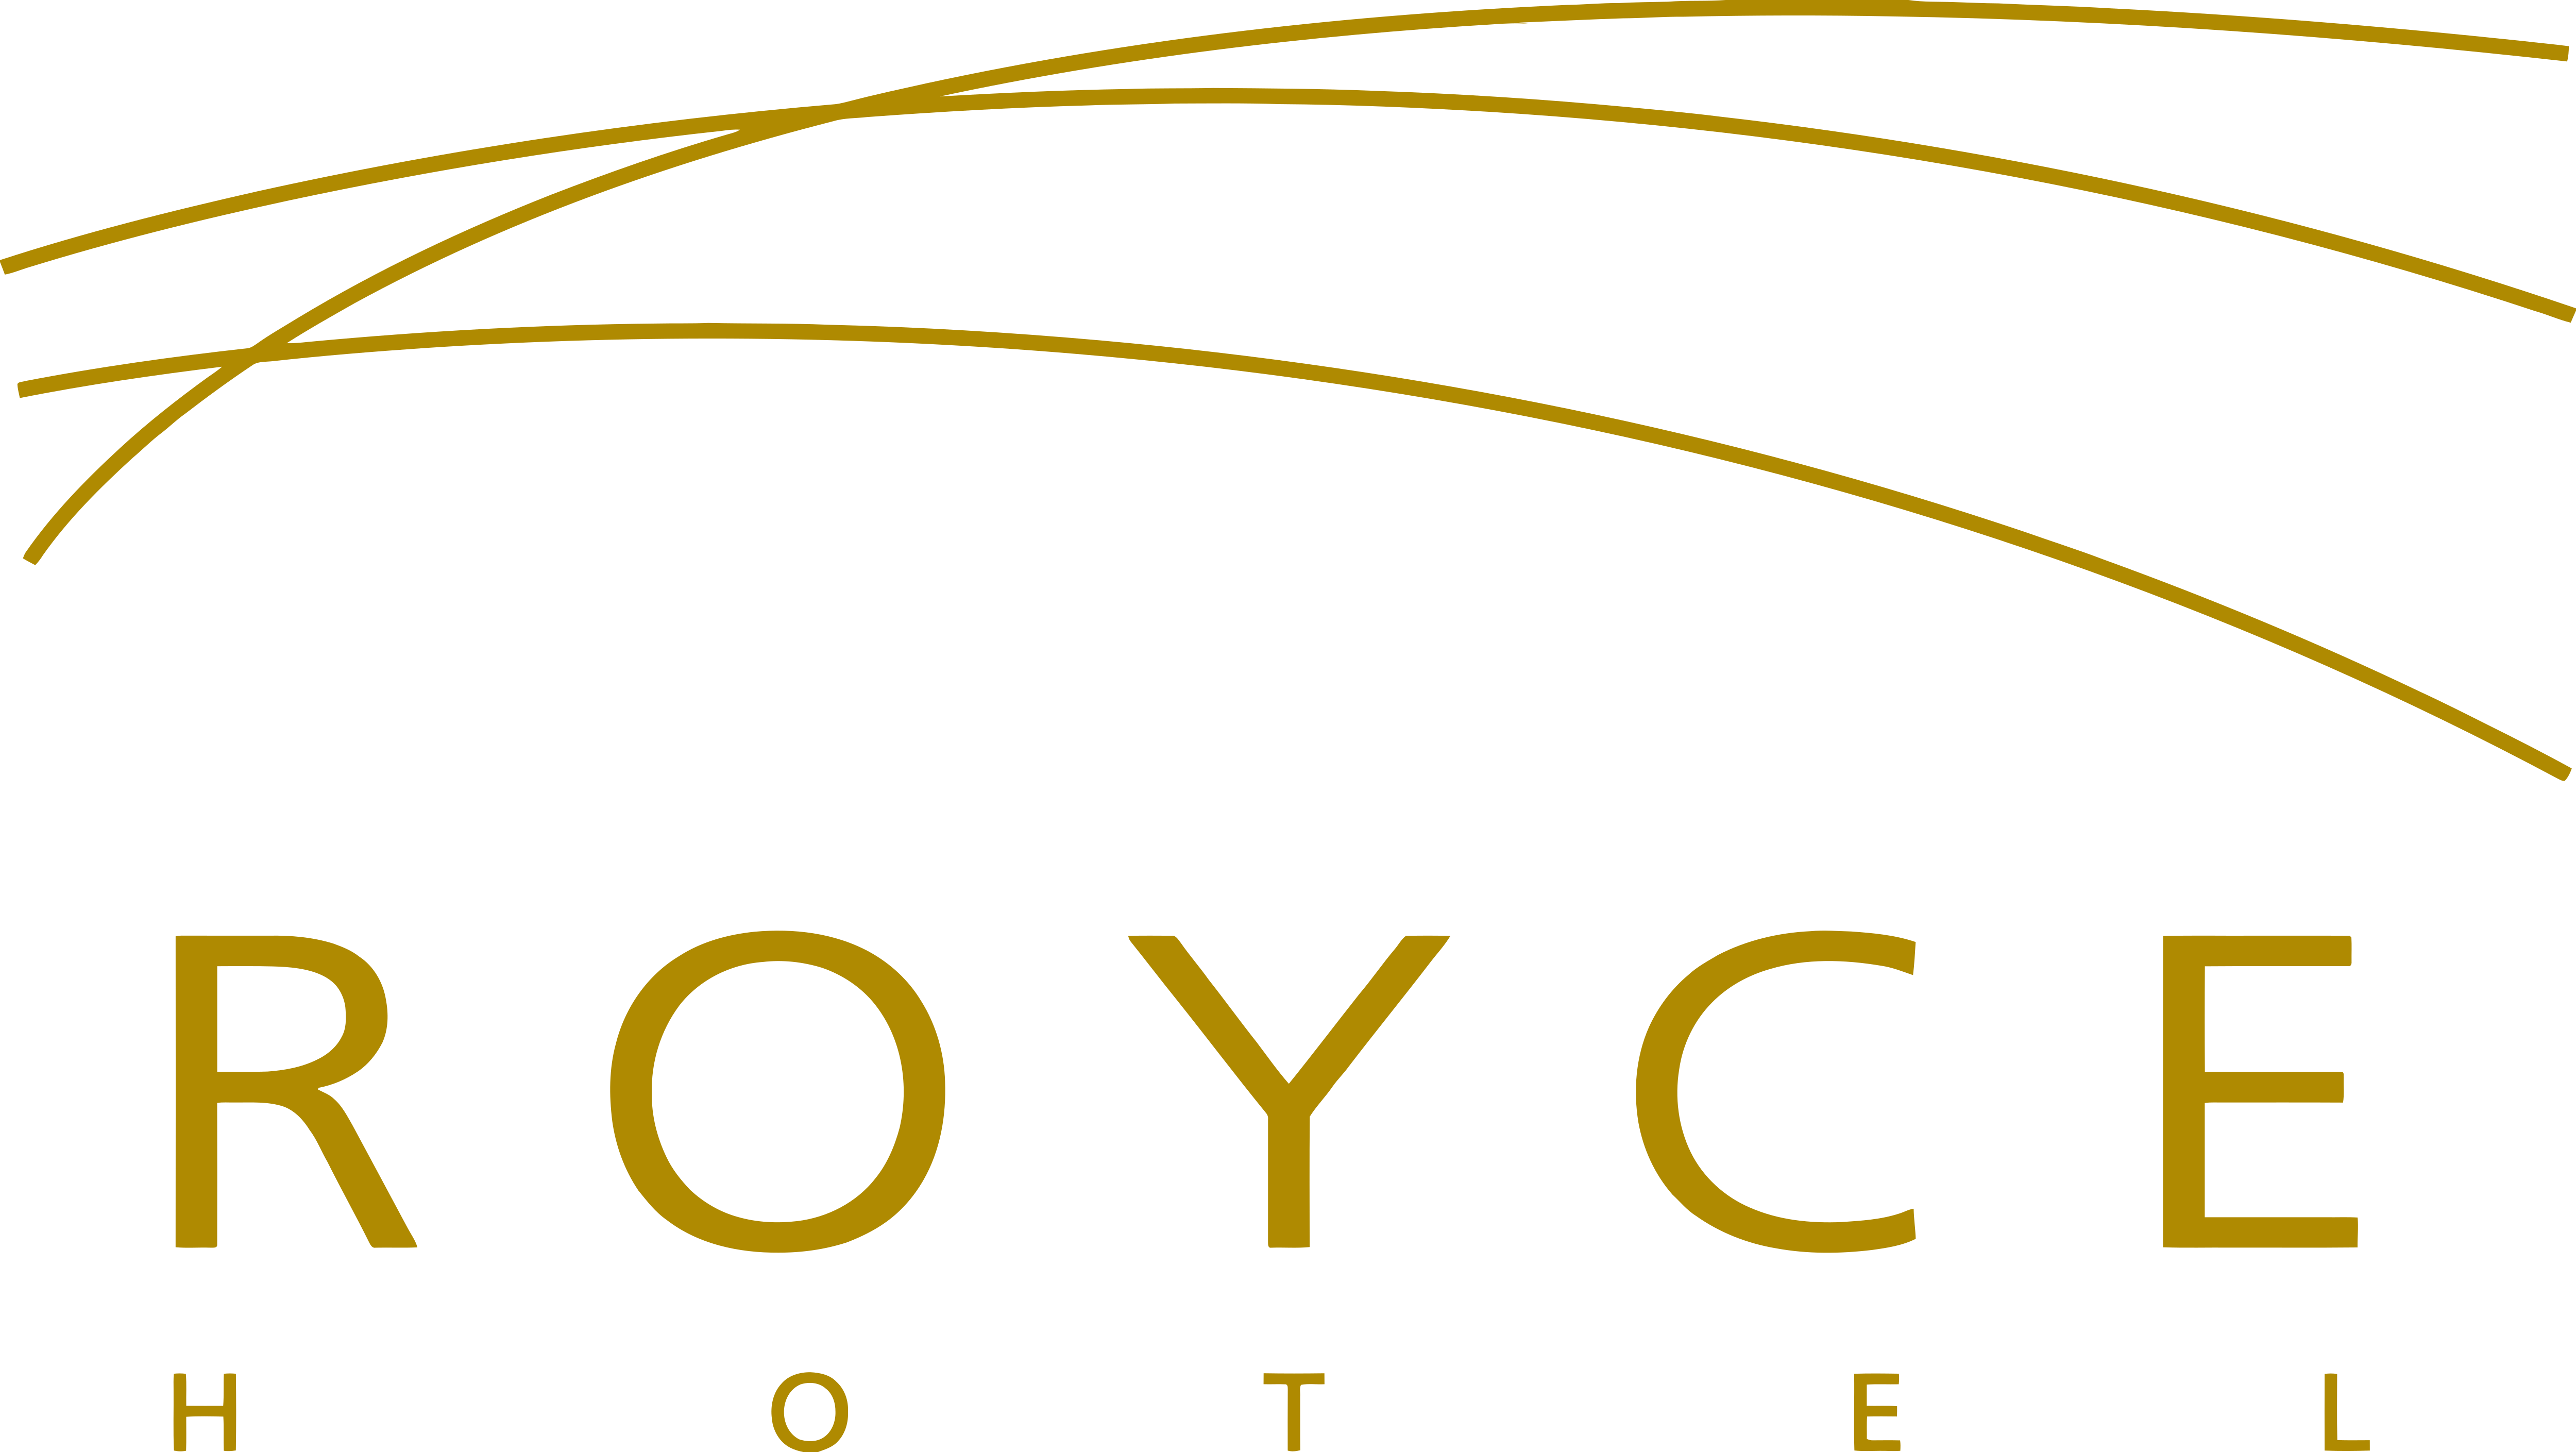 royce hotel free png download #41795